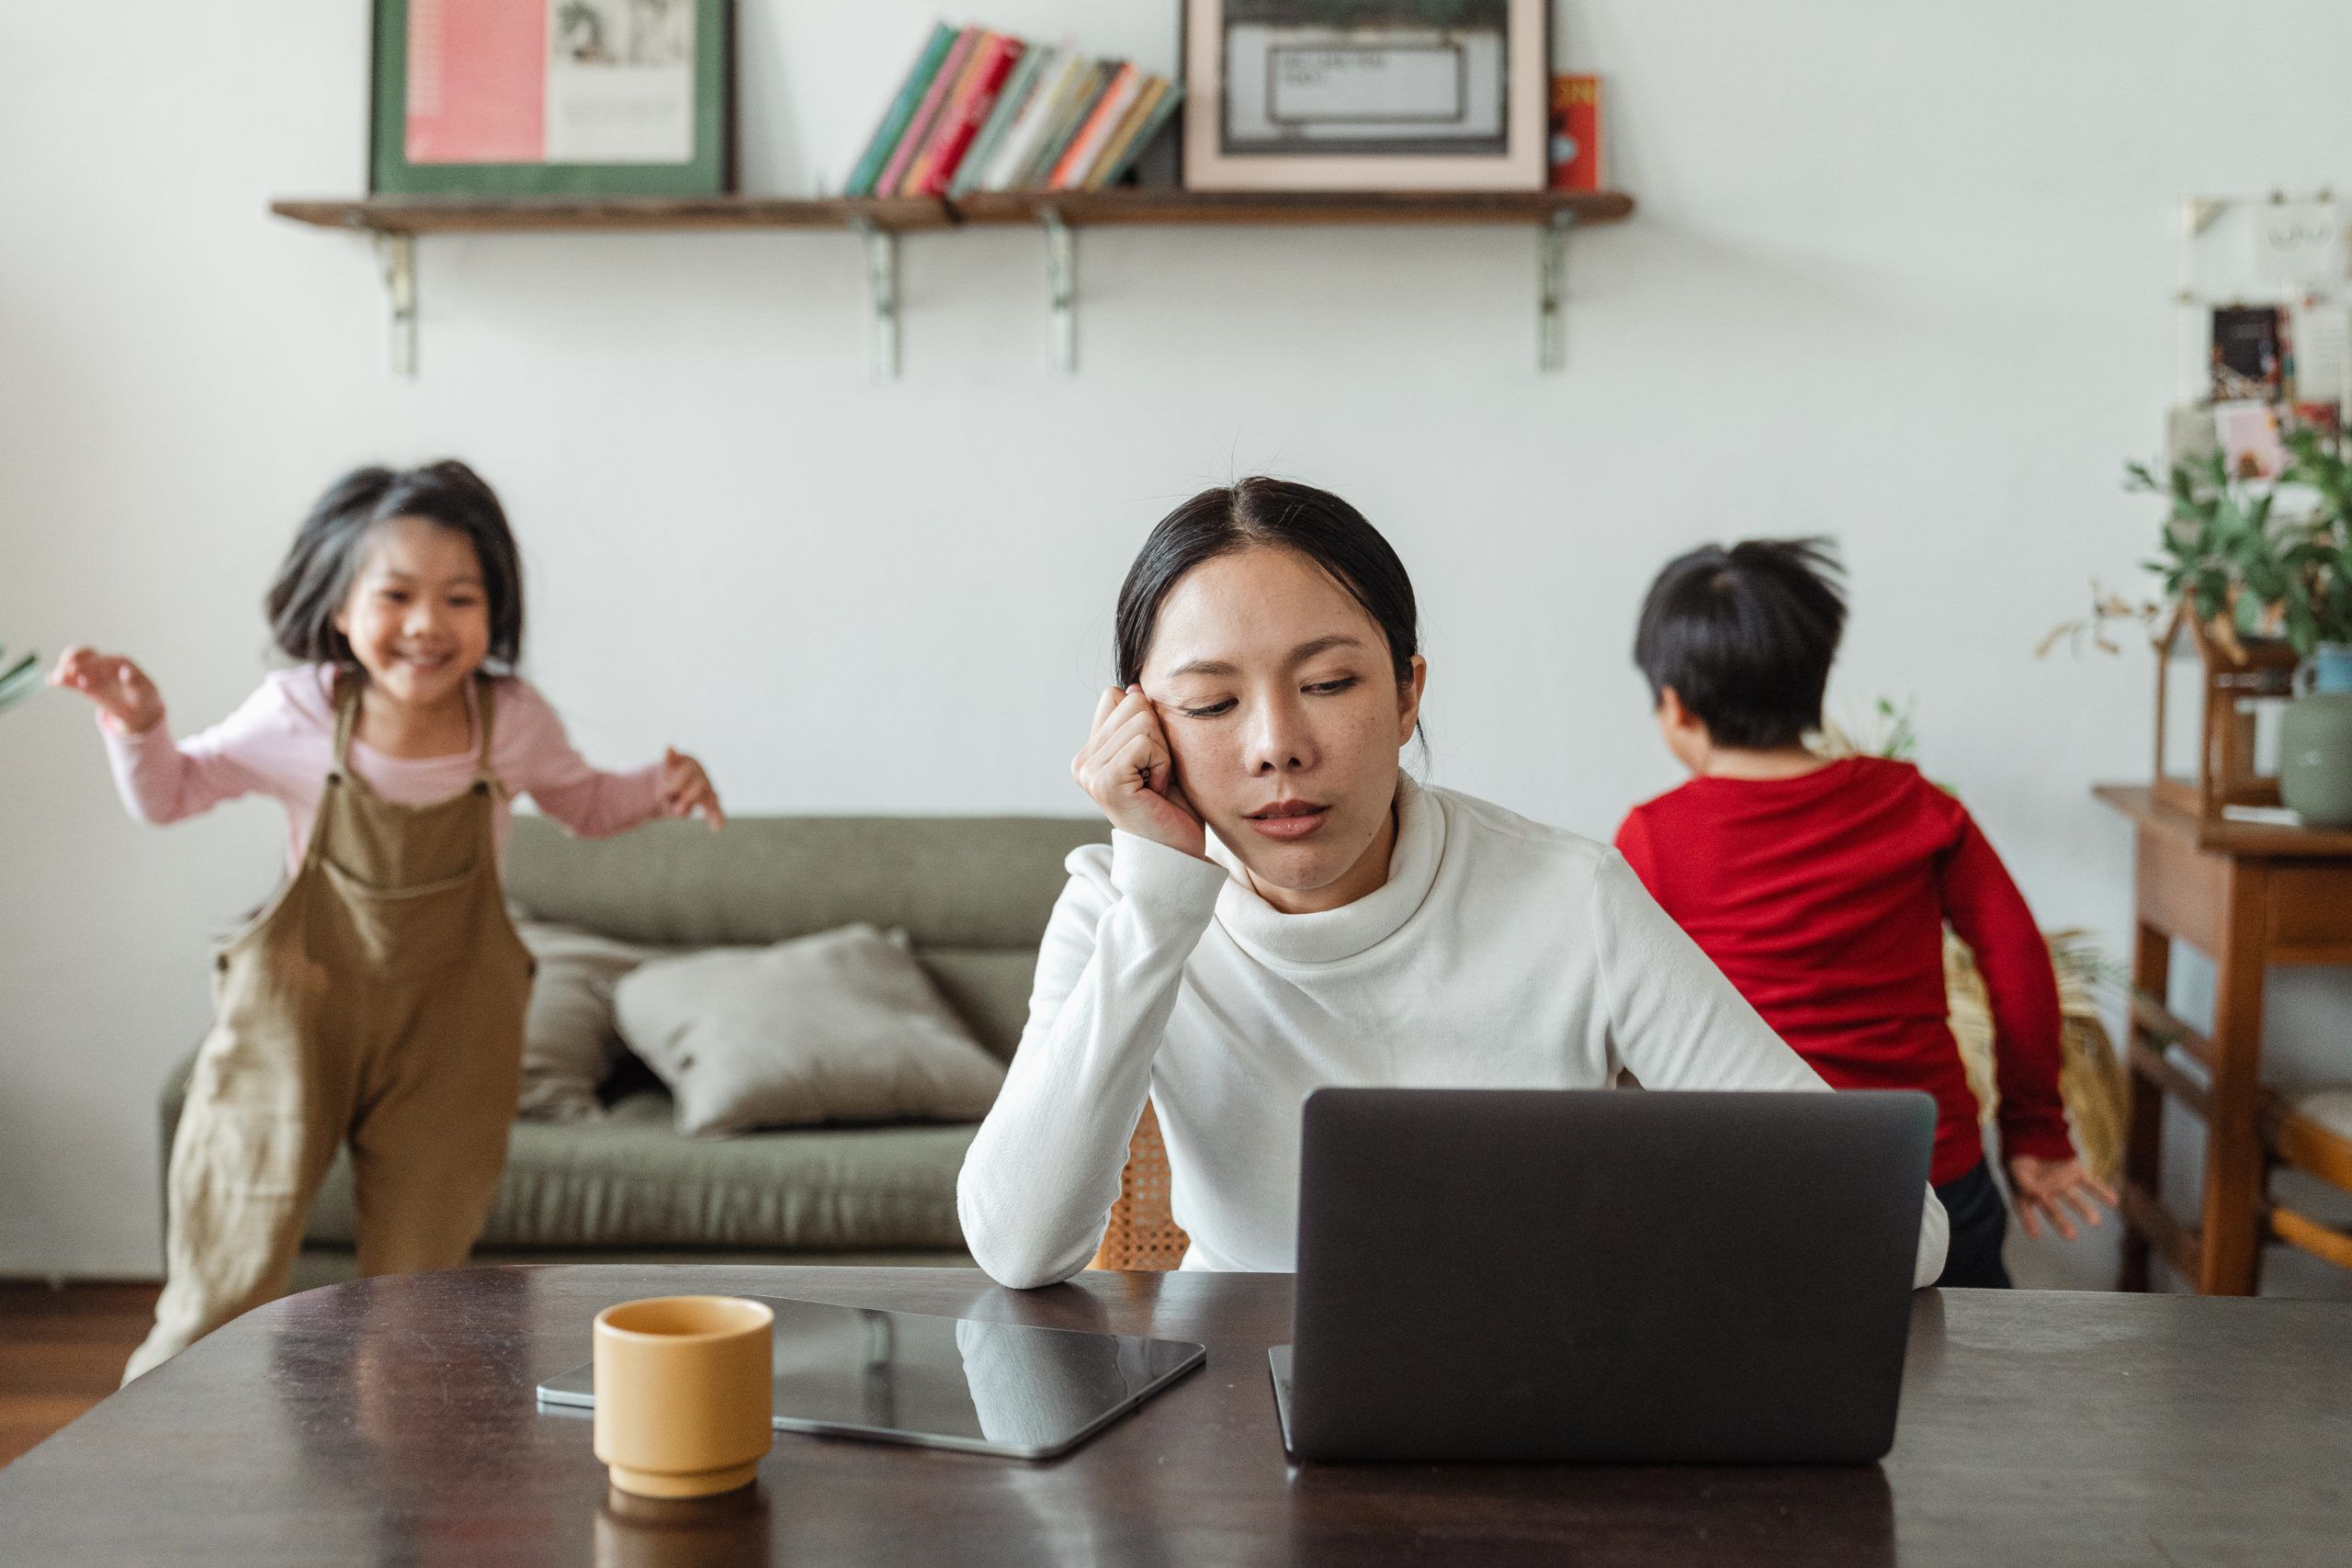 Remote Inequality: The effects of working from home on the work-life balance of women